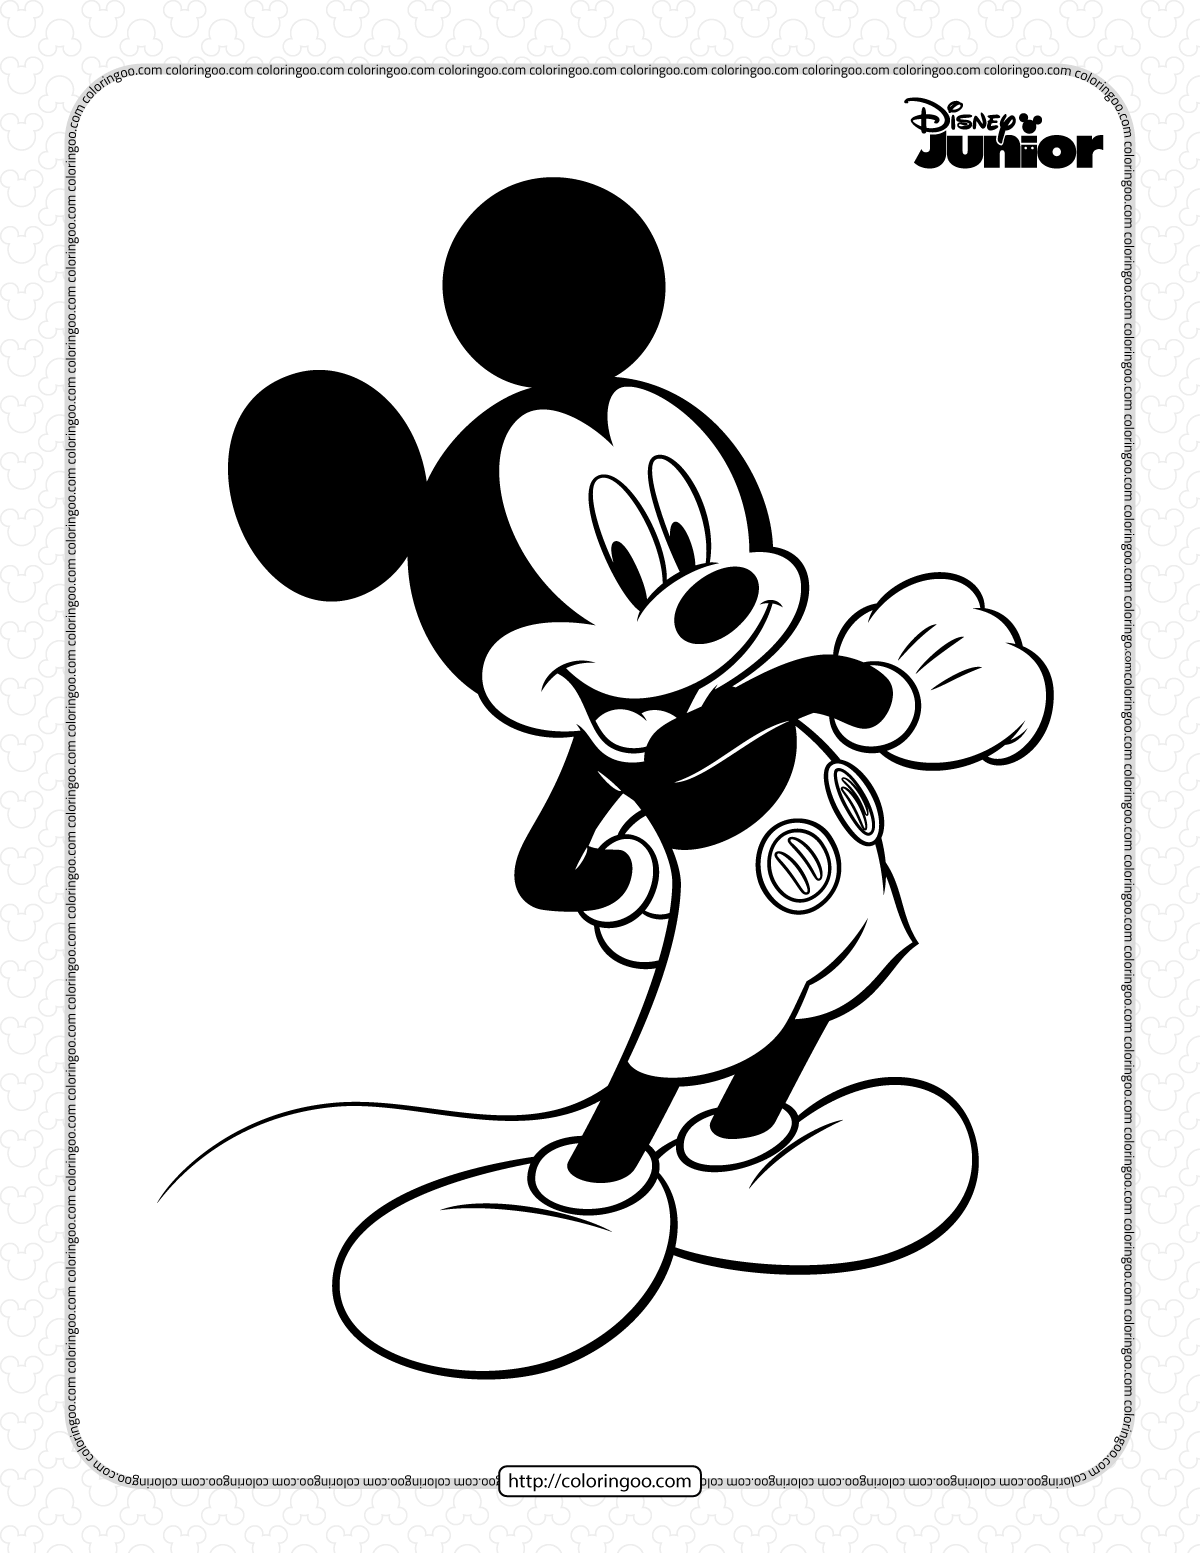 disney mickey mouse adventures coloring pages